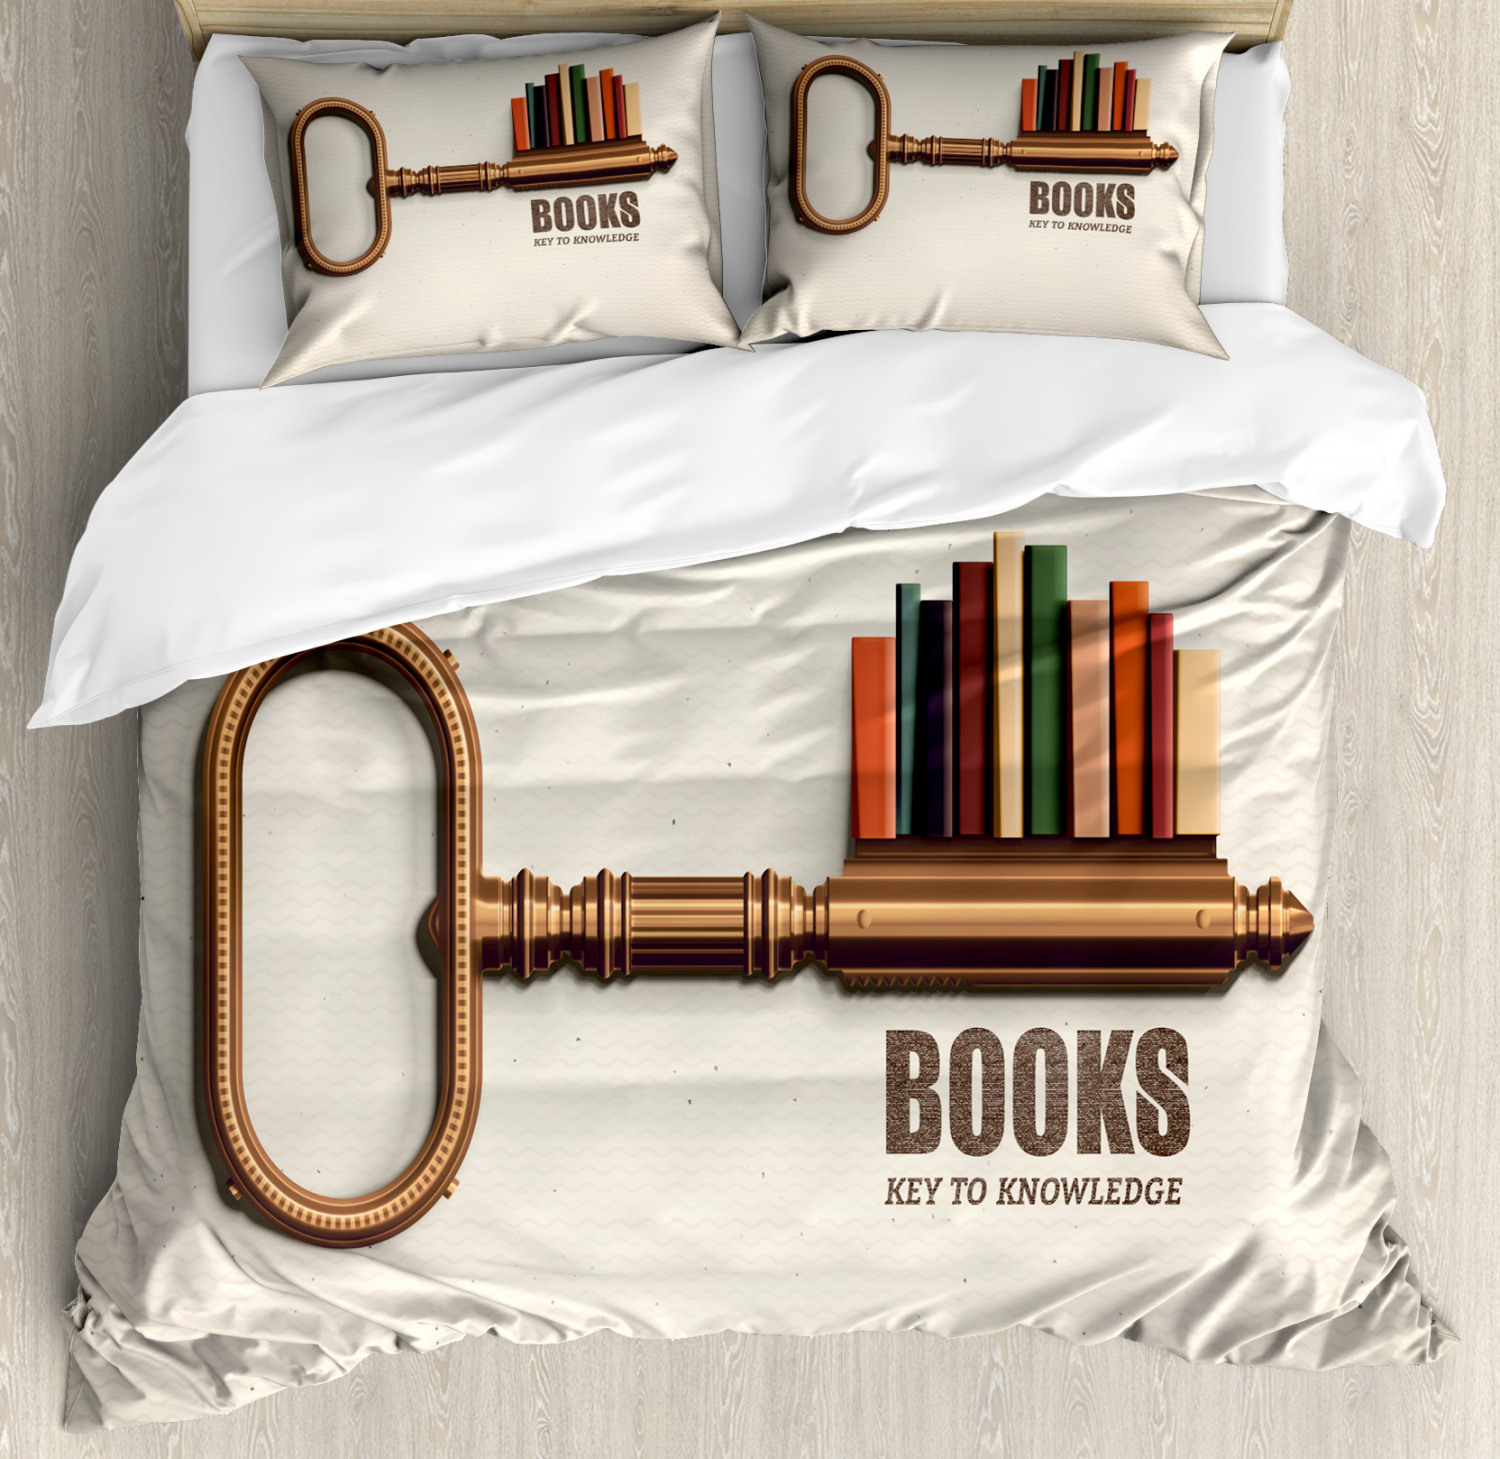 Book Duvet Cover Set With Pillow Shams Key To Knowledge Theme